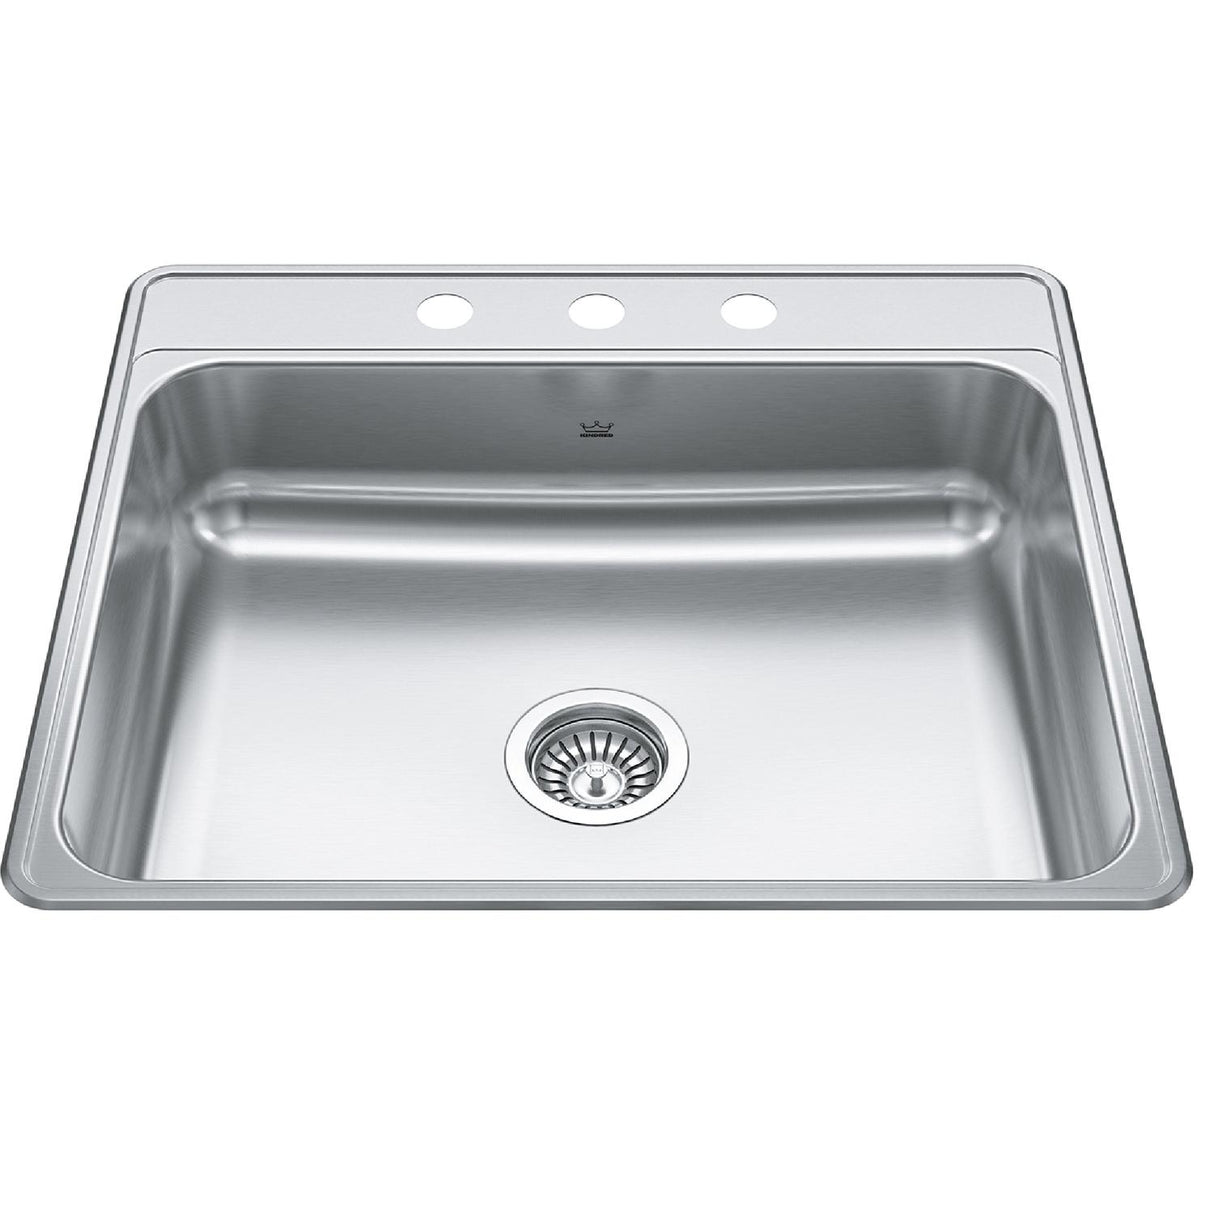 KINDRED CSLA2522-7-3N Creemore 25-in LR x 22-in FB x 7-in DP Drop In Single Bowl 3-Hole Stainless Steel Kitchen Sink In Commercial Satin Finish